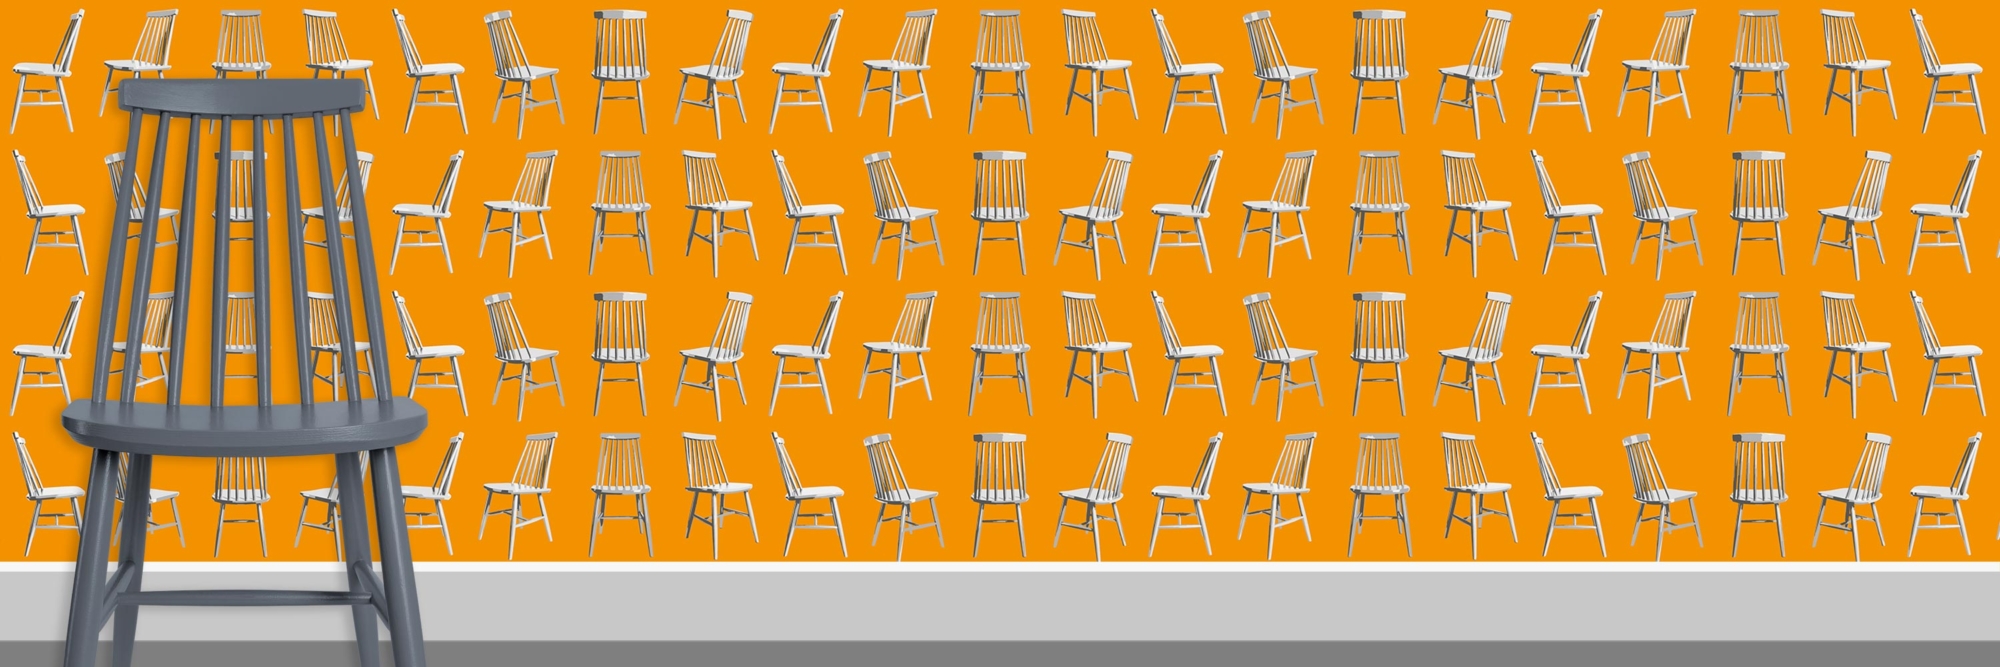 Patterns plus chair for Instagram Page